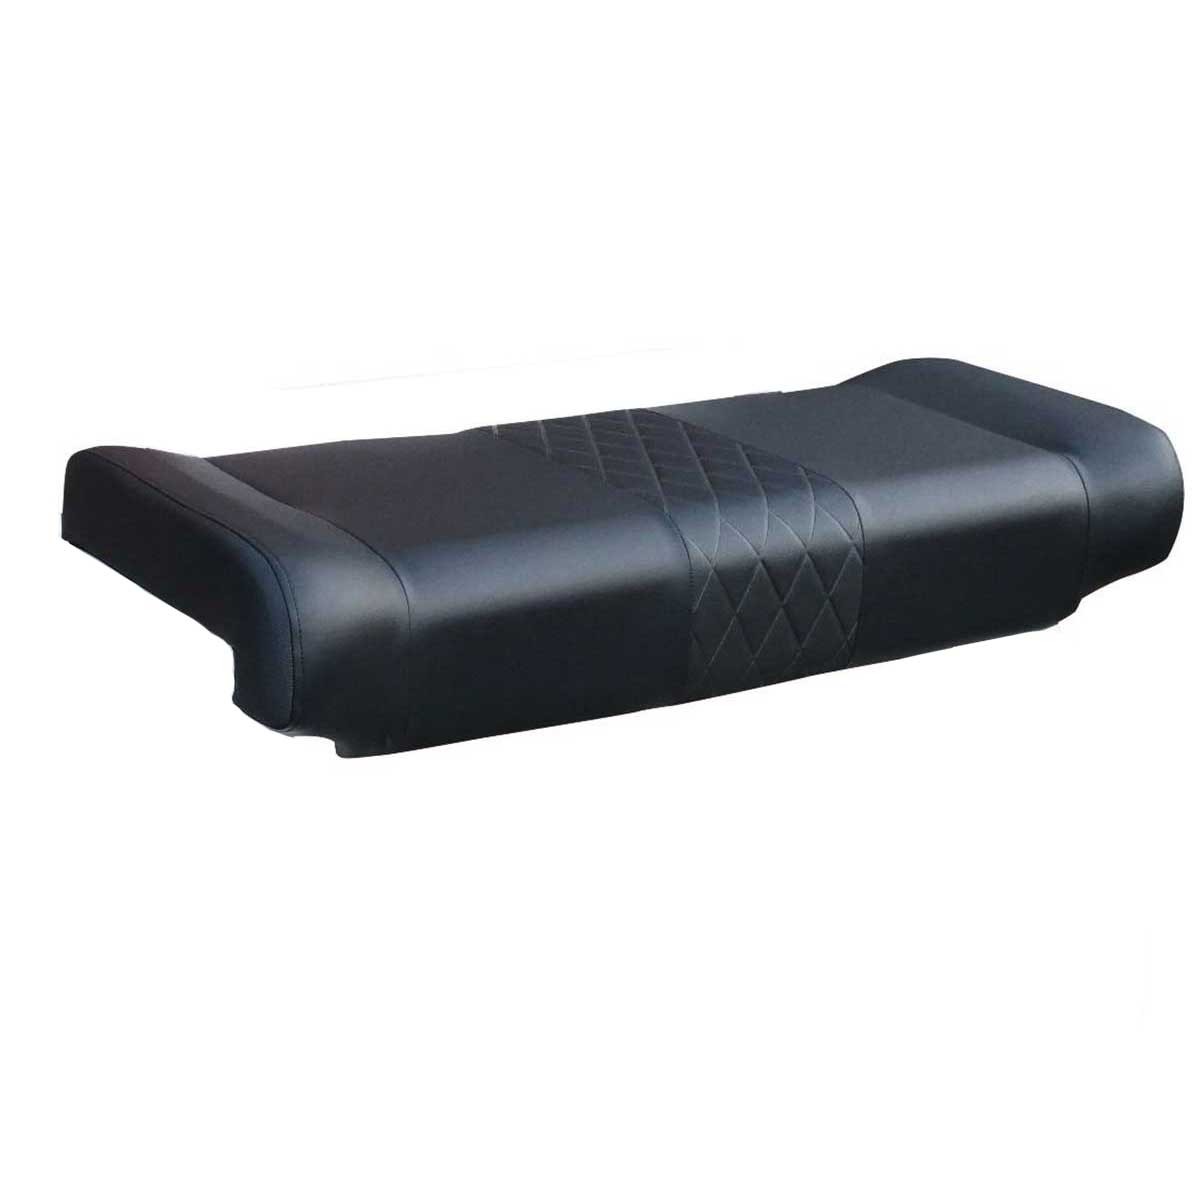 coussin d'assise leaning post fishmaster noir